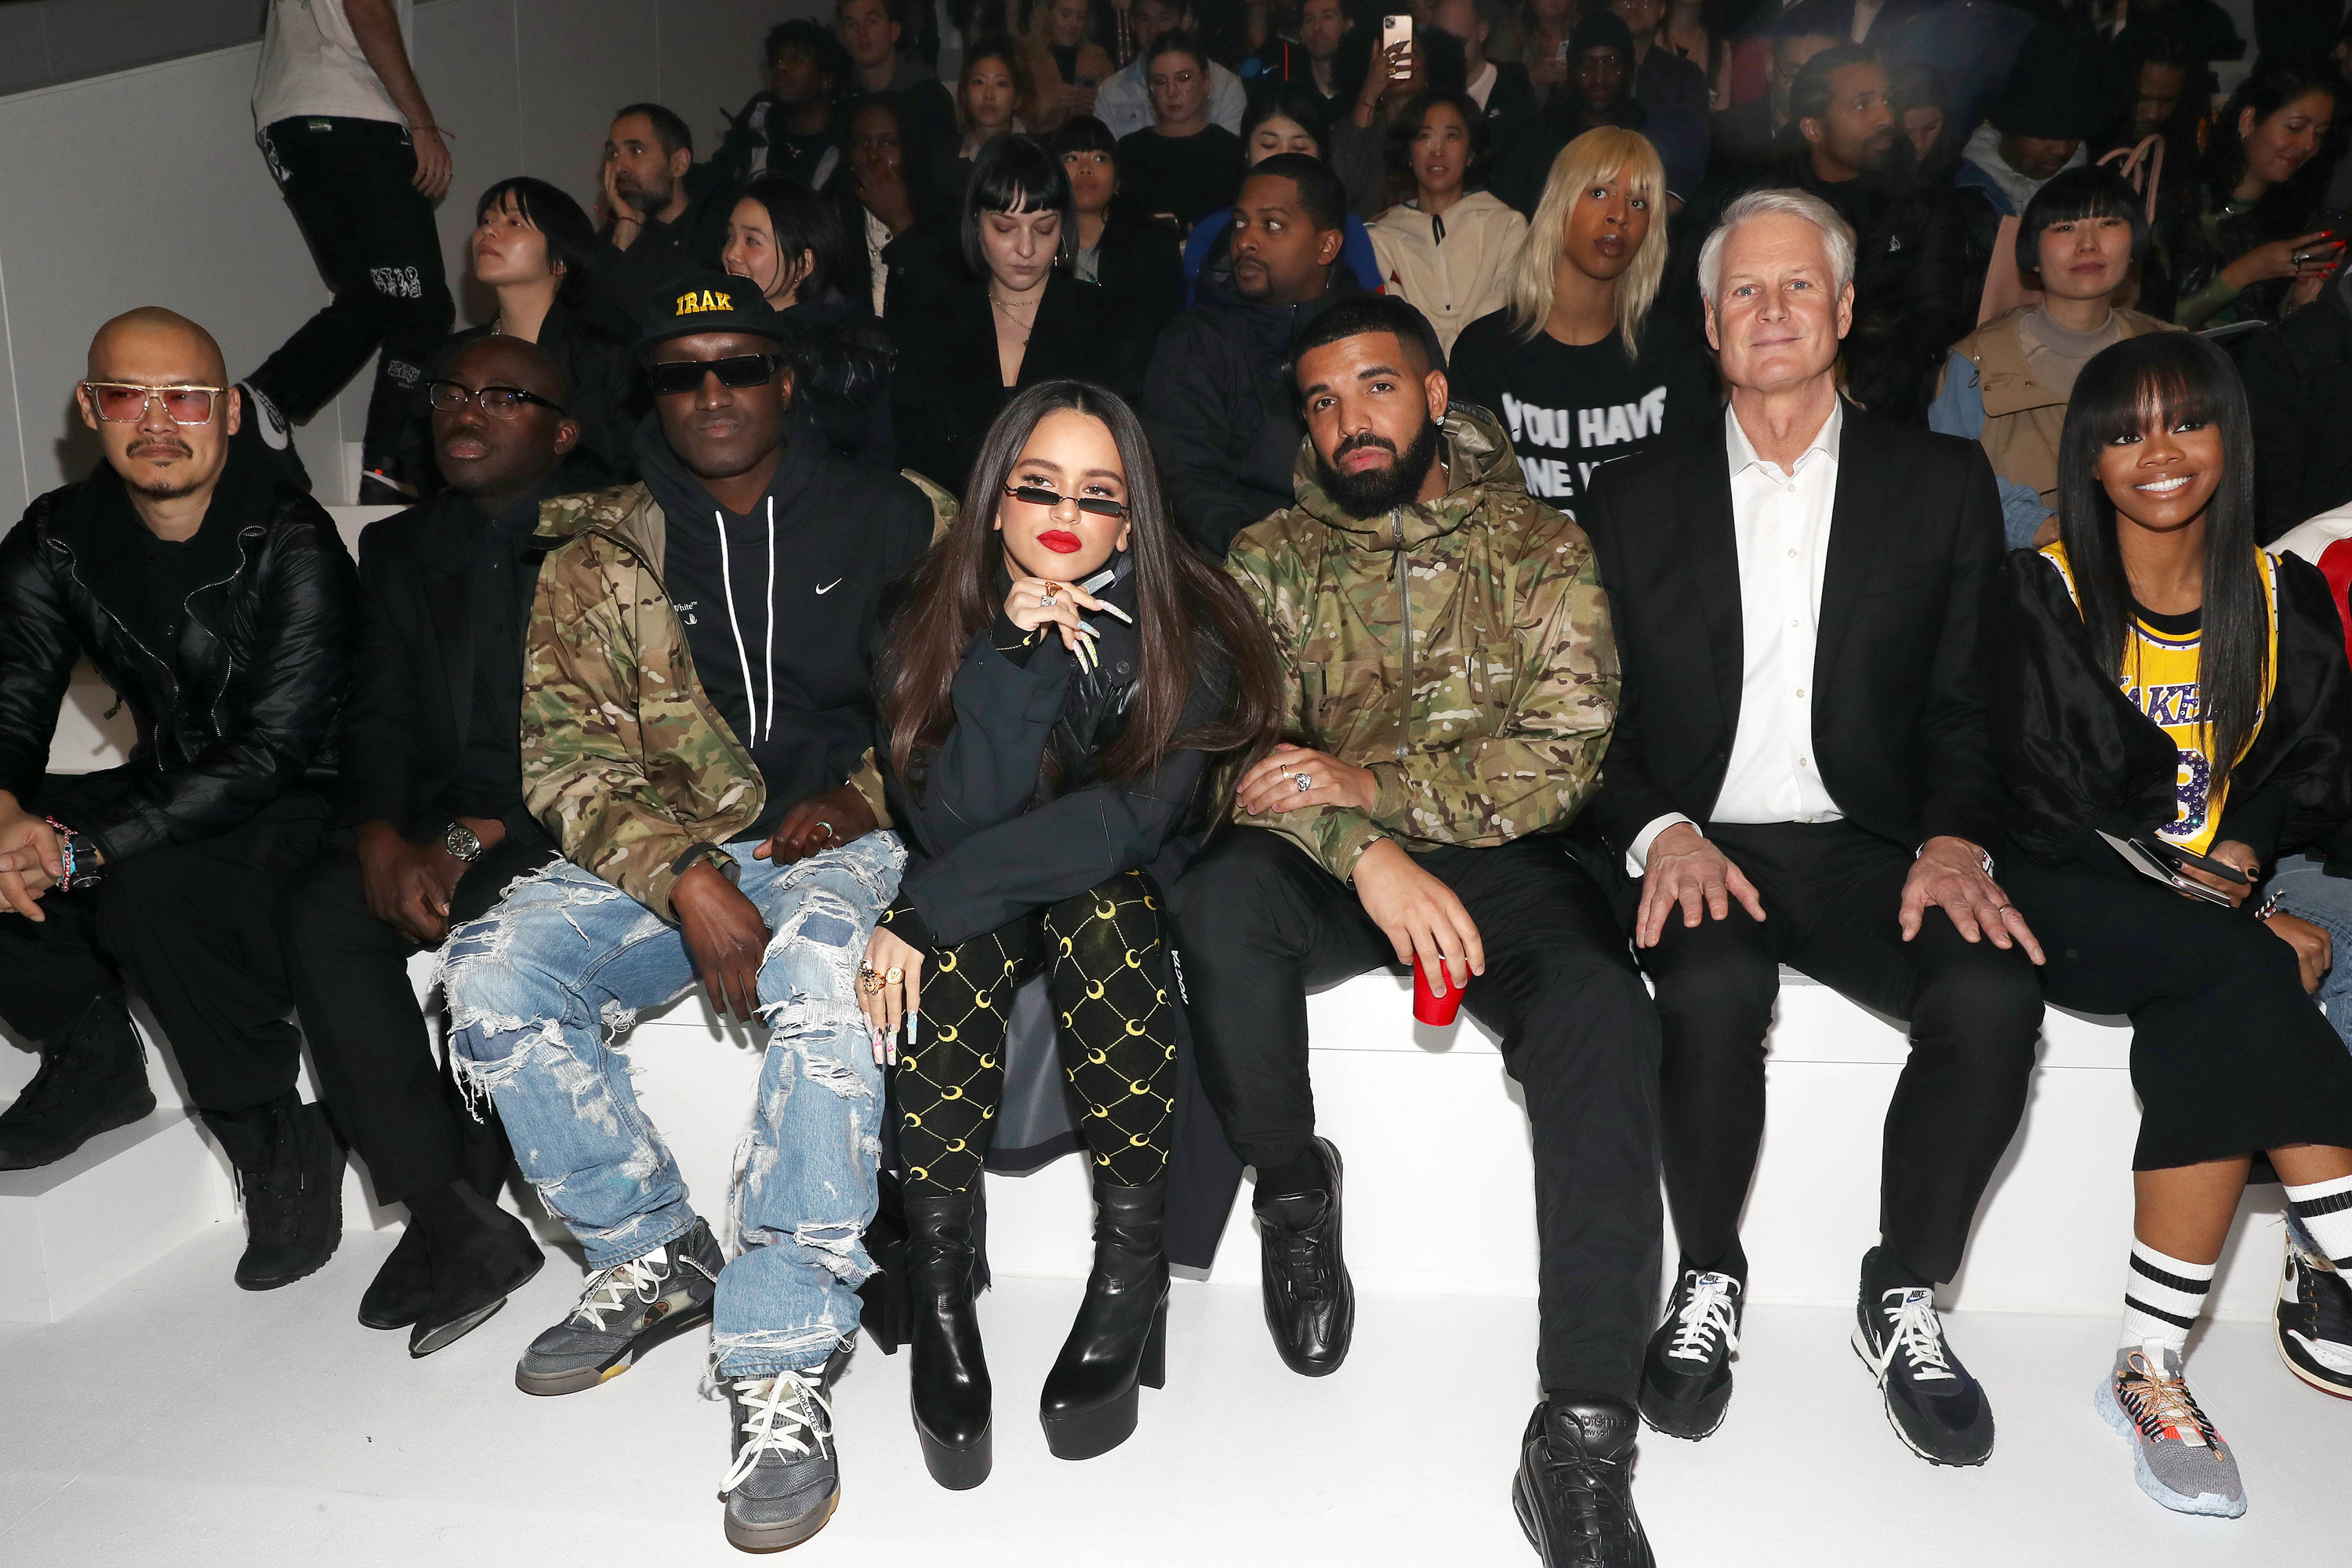 Edward Enninful, Virgil Abloh, Rosalia, Drake, John Donahoe, and Gabby Douglas attend the 2020 Tokyo Olympic collection fashion show at the Shed on Feb. 5, 2020, in New York City.